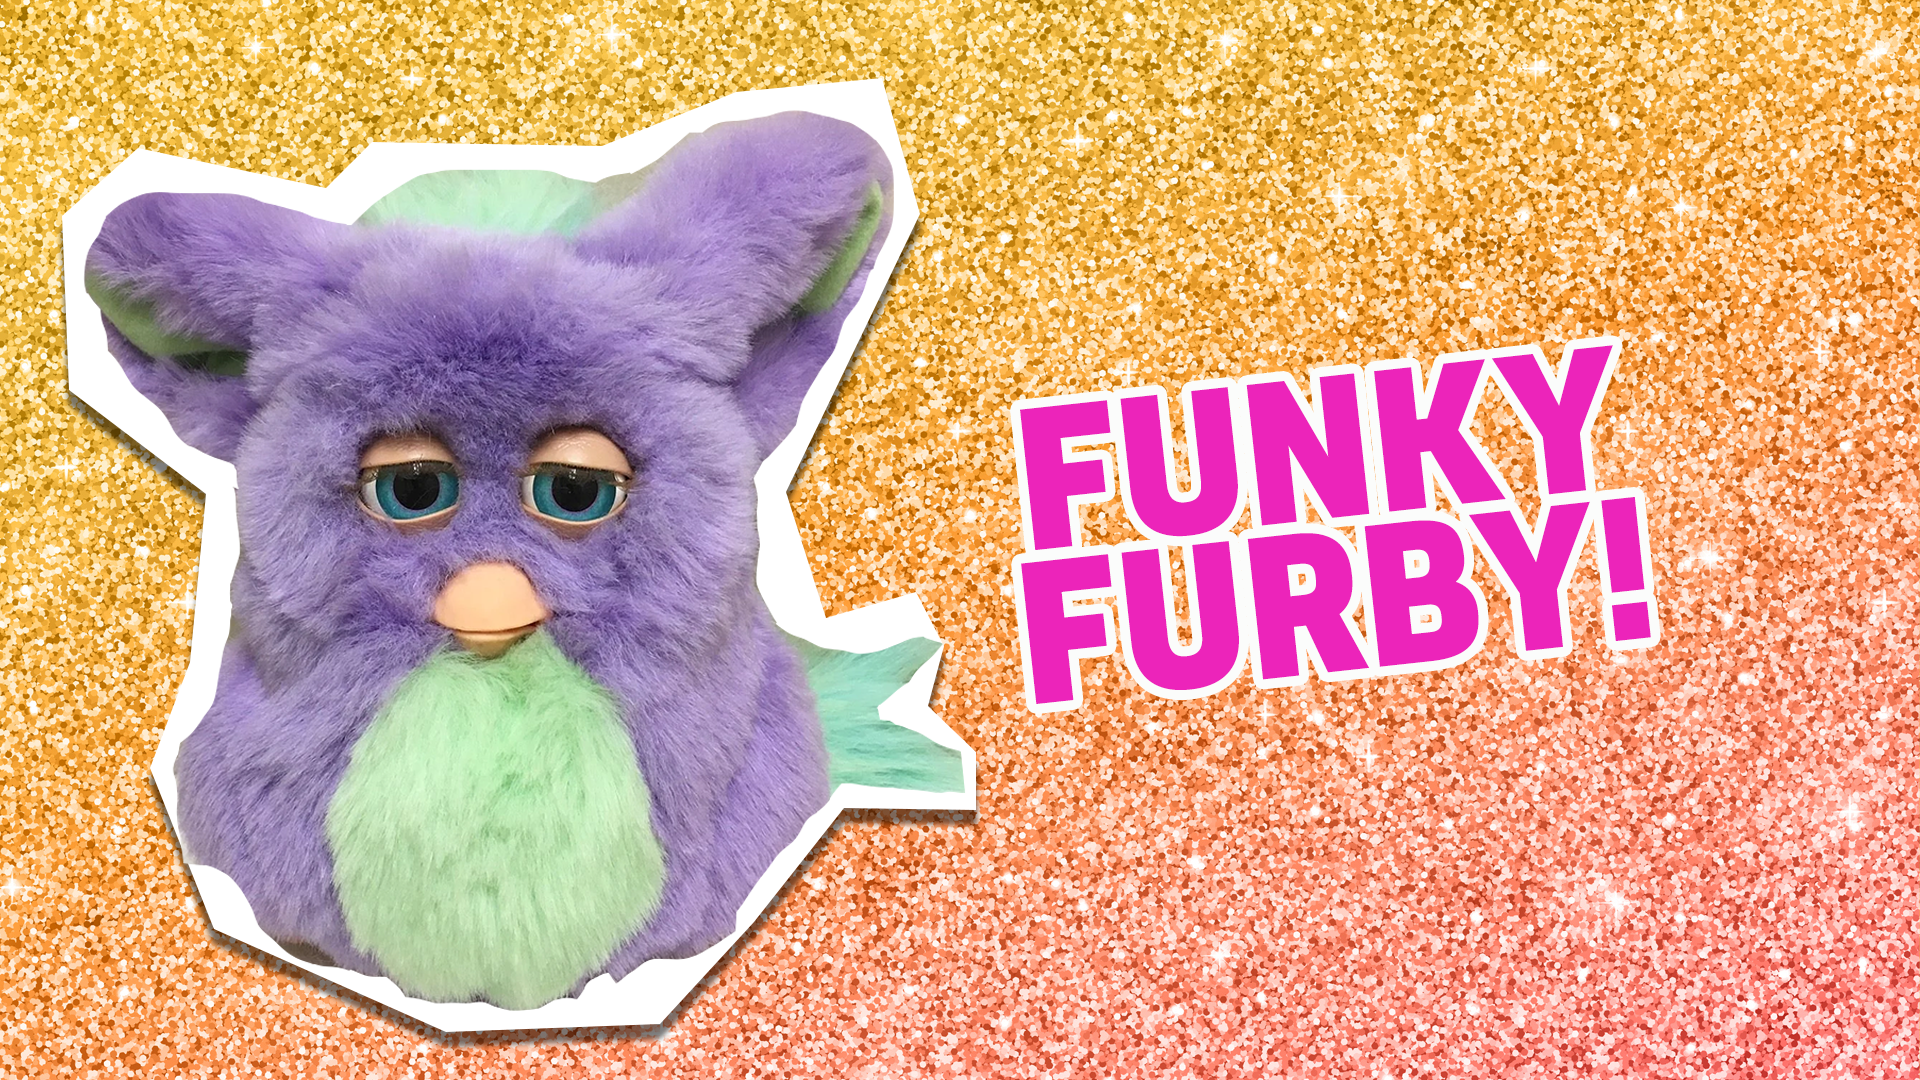 You're a Funky Furby! You're cool, fun, and, well...funky! You can dance, you can sing, you're a true musical marvel! And you've got a tail, cool!